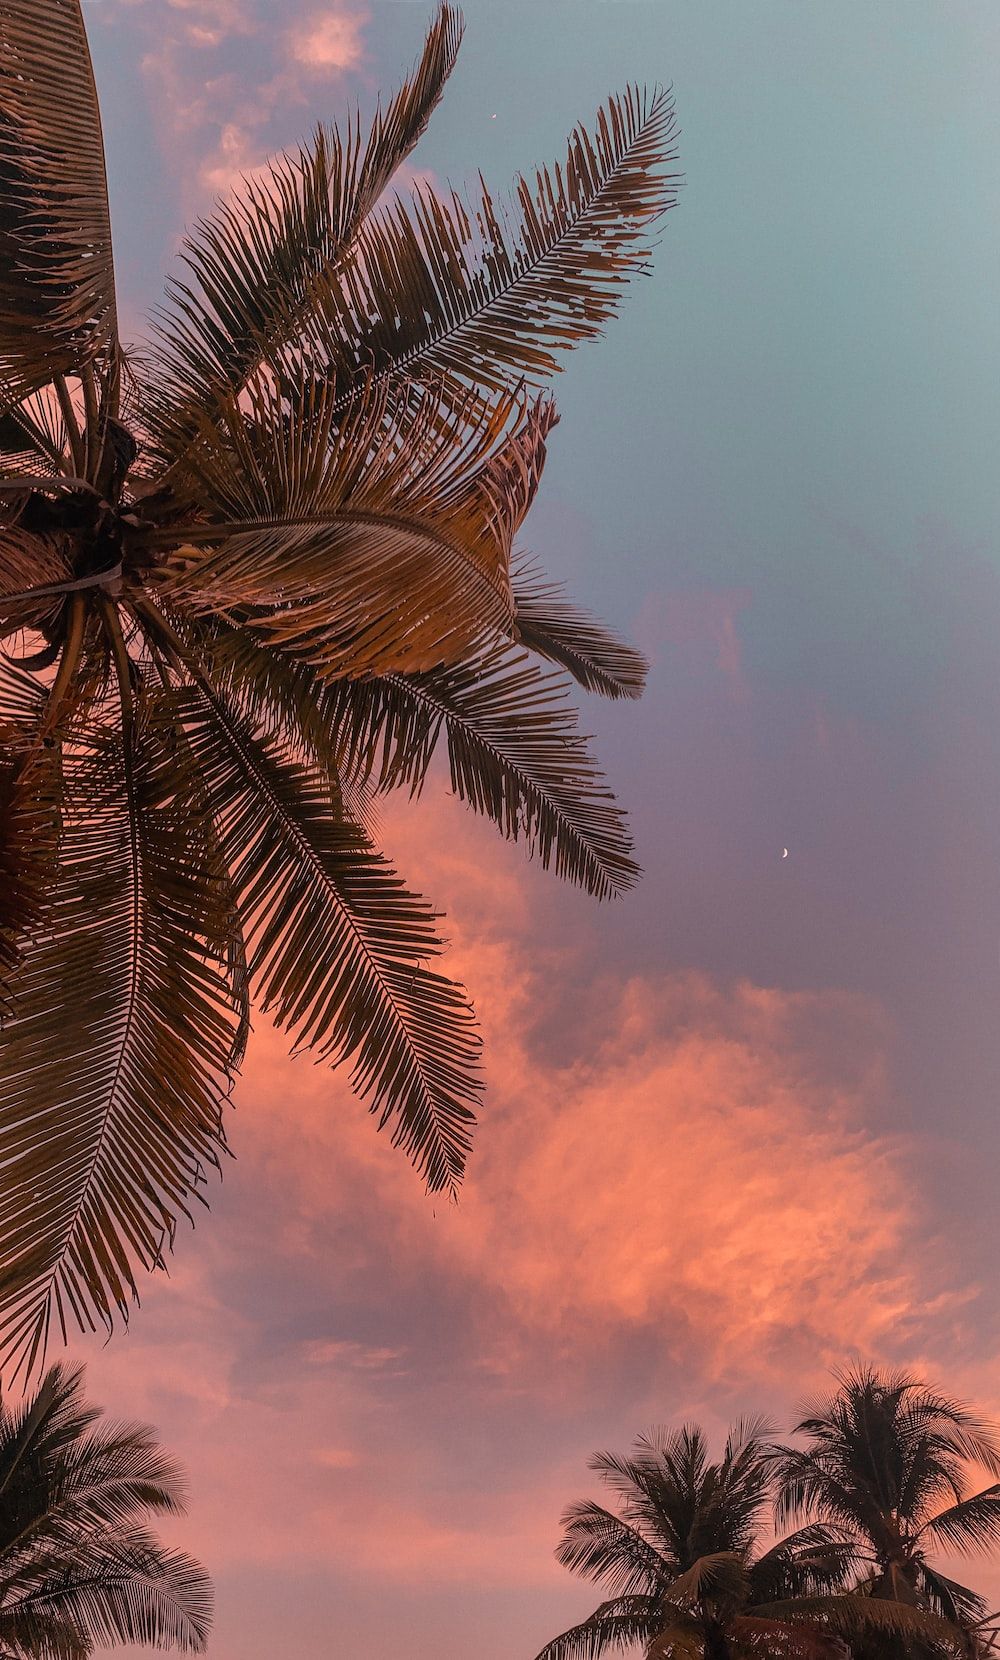 Palm trees under the pink and blue sky - Sunset, photography, sunrise, HD, palm tree